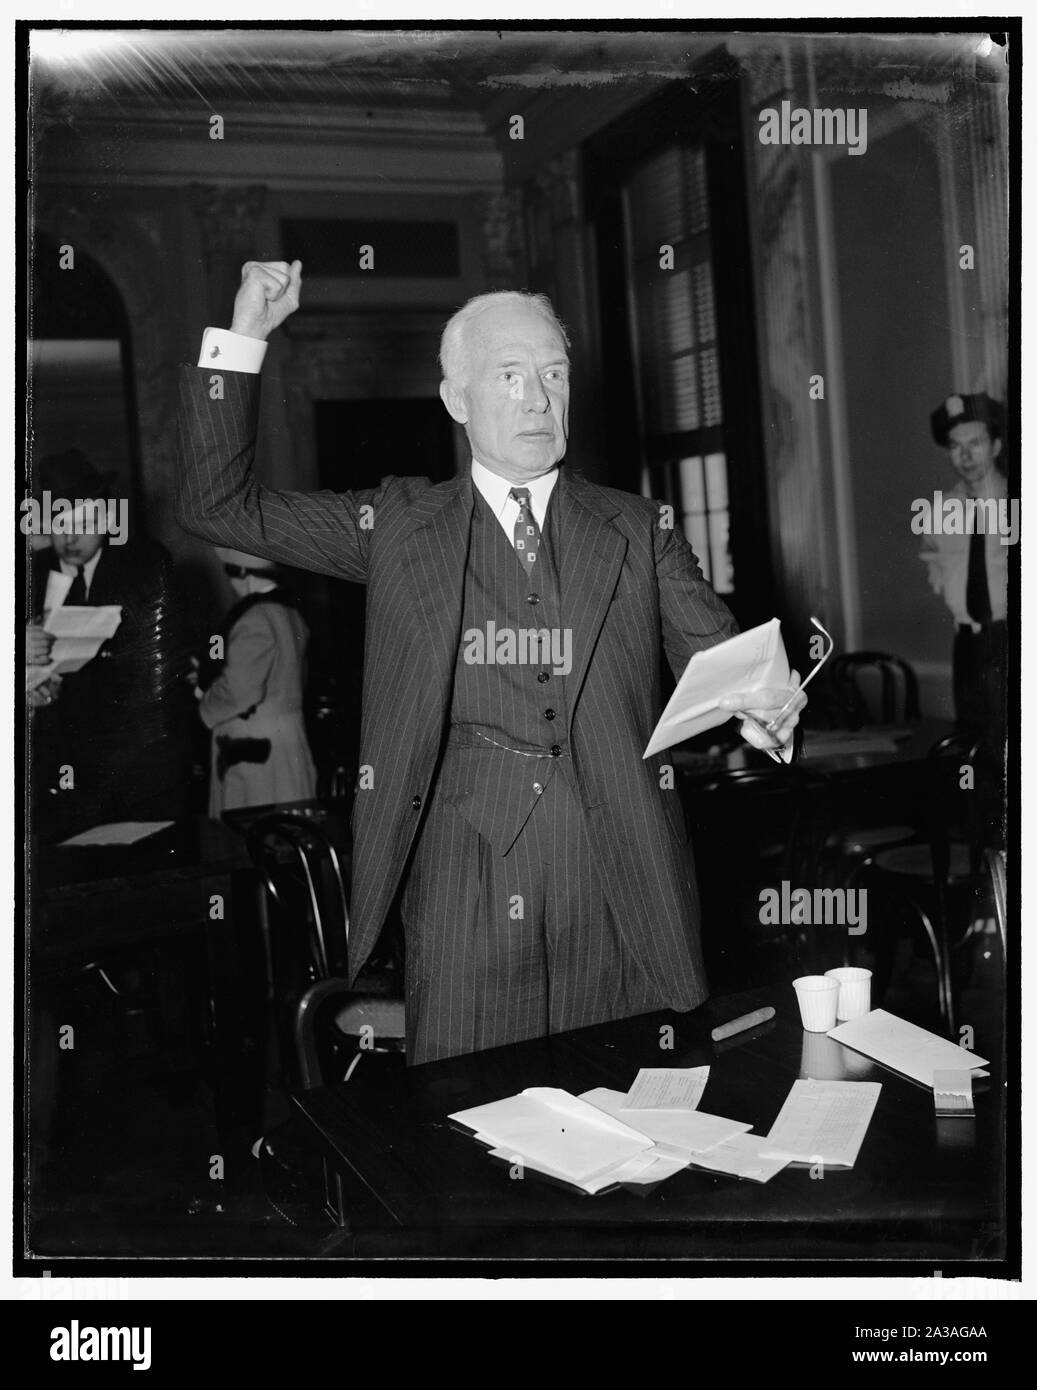 Senate lobby committee again refuffed. Washington, D.C., April 20. Efforts of the Senate Lobby Committee to obtain records of the National Committee to uphold Constitutional Government hit another snag today when Sumner Gerard, Treasurer of the Organization, testified he did not have in his control a list of contributors to the National Committee. Gerard, A brother of James Gerard, former Ambassador to Germany, was questioned by the committee in his investigating of Lobby activities uding congressional consideration of the Government reorganization bill, 4/20/38 Stock Photo